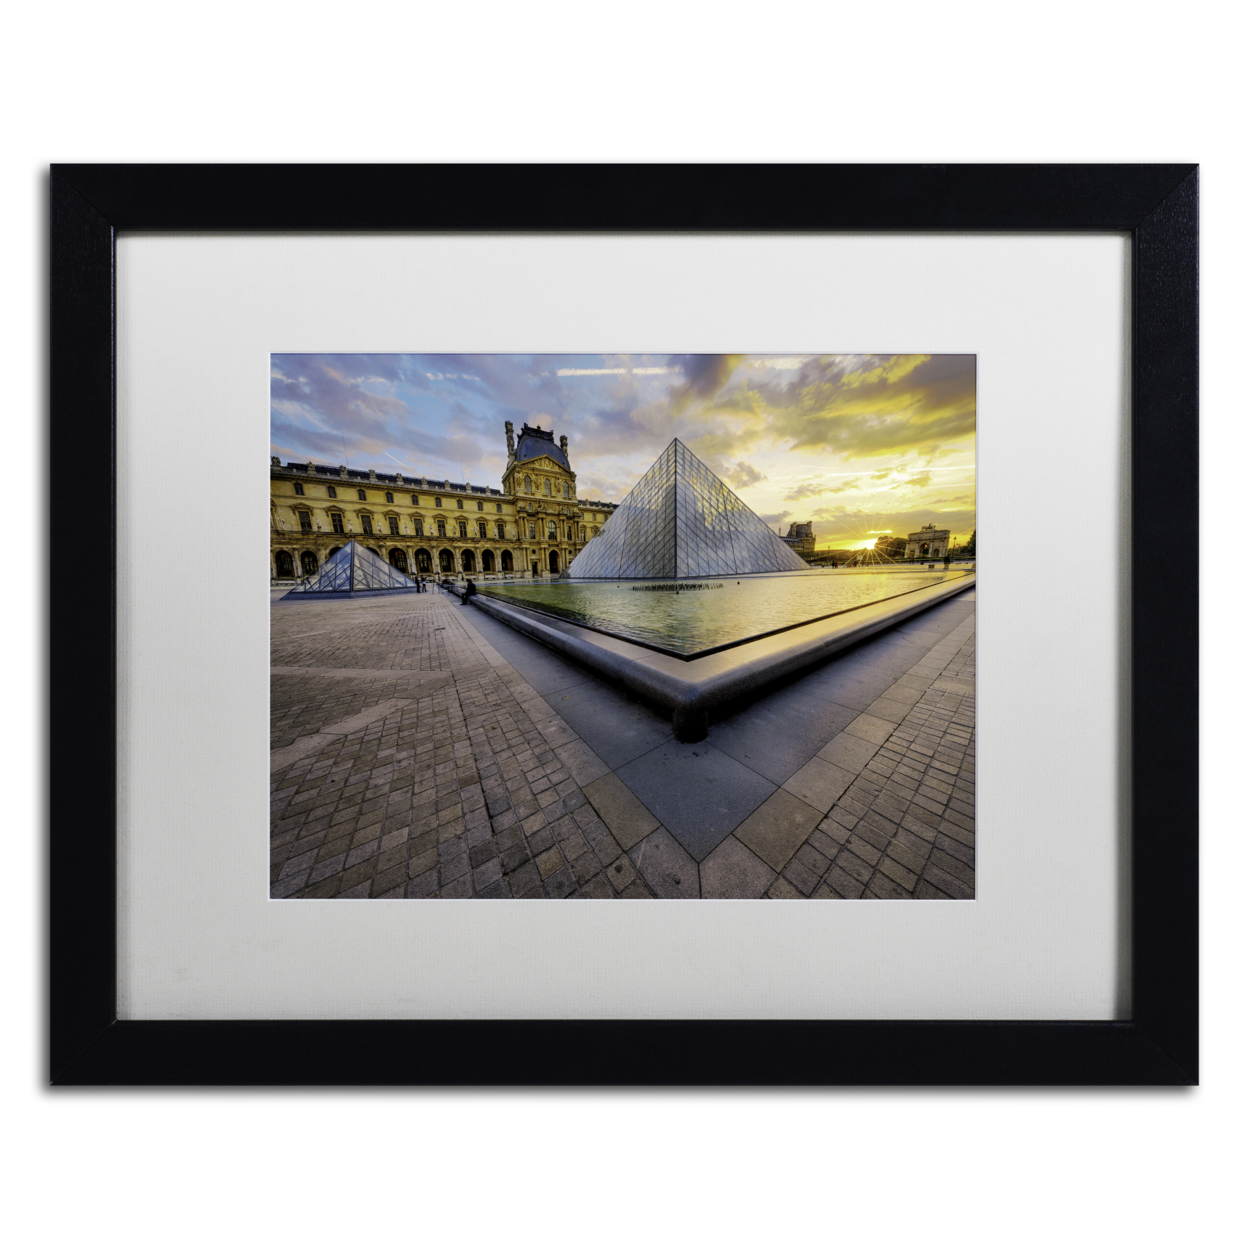 Mathieu Rivrin 'Geometry Of The Louvre Museum' Black Wooden Framed Art 18 X 22 Inches